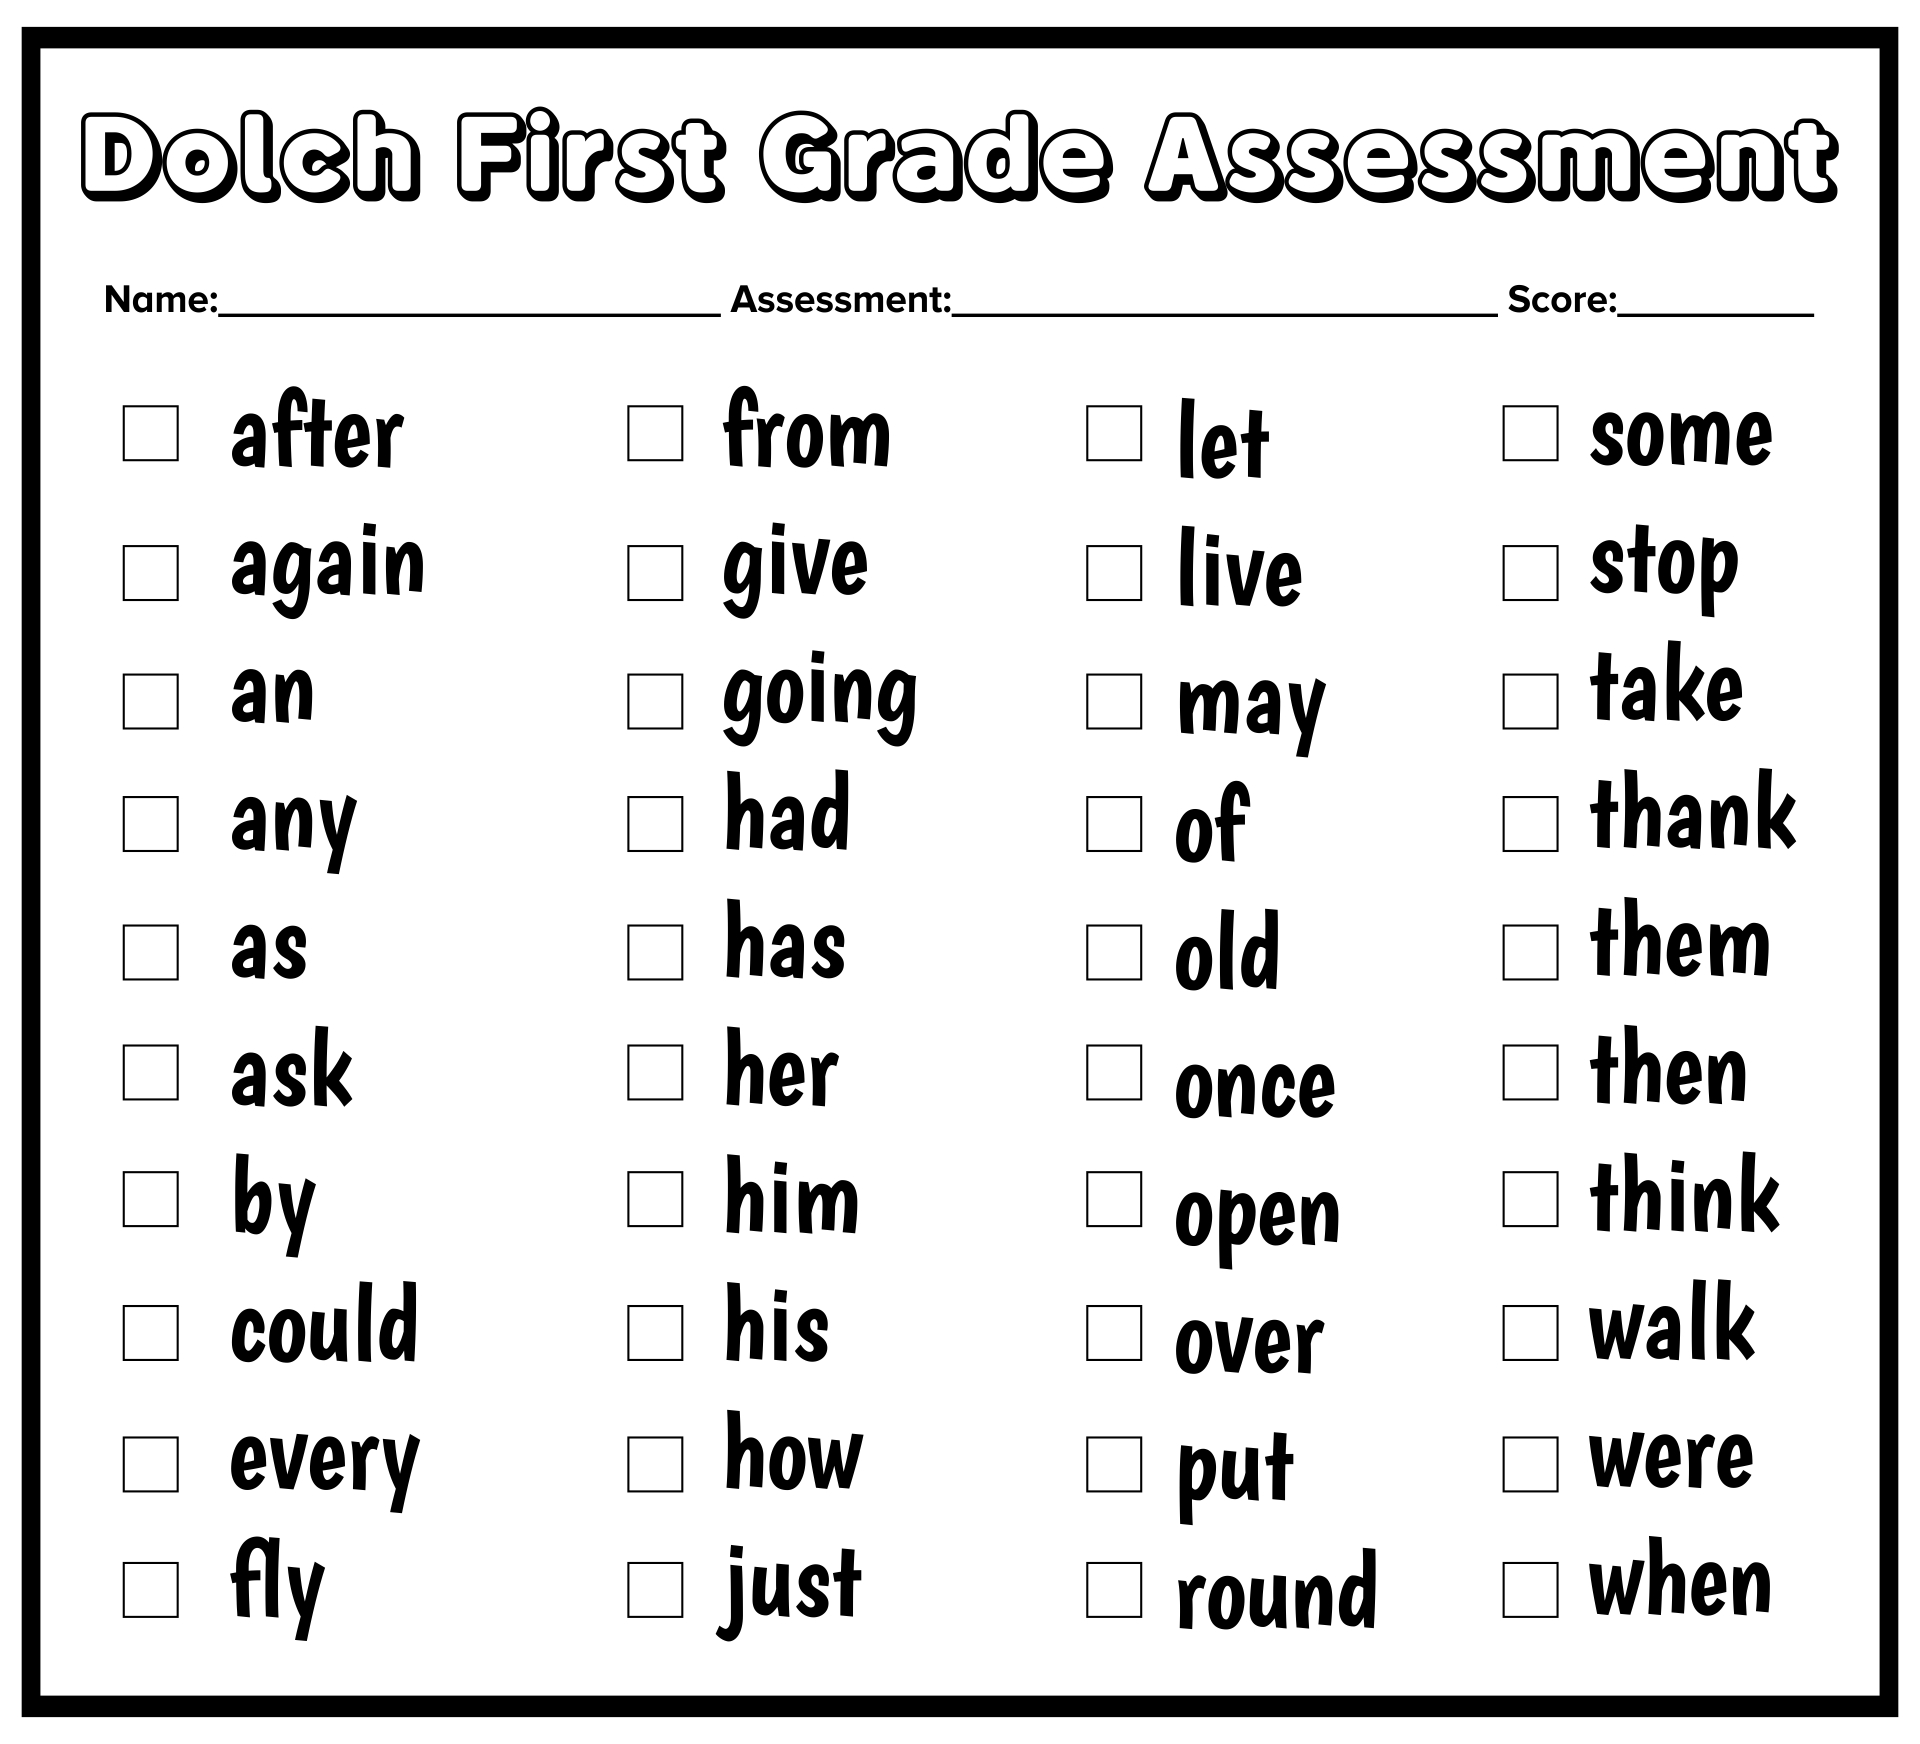 Printable First Grade Dolch Word Assessment